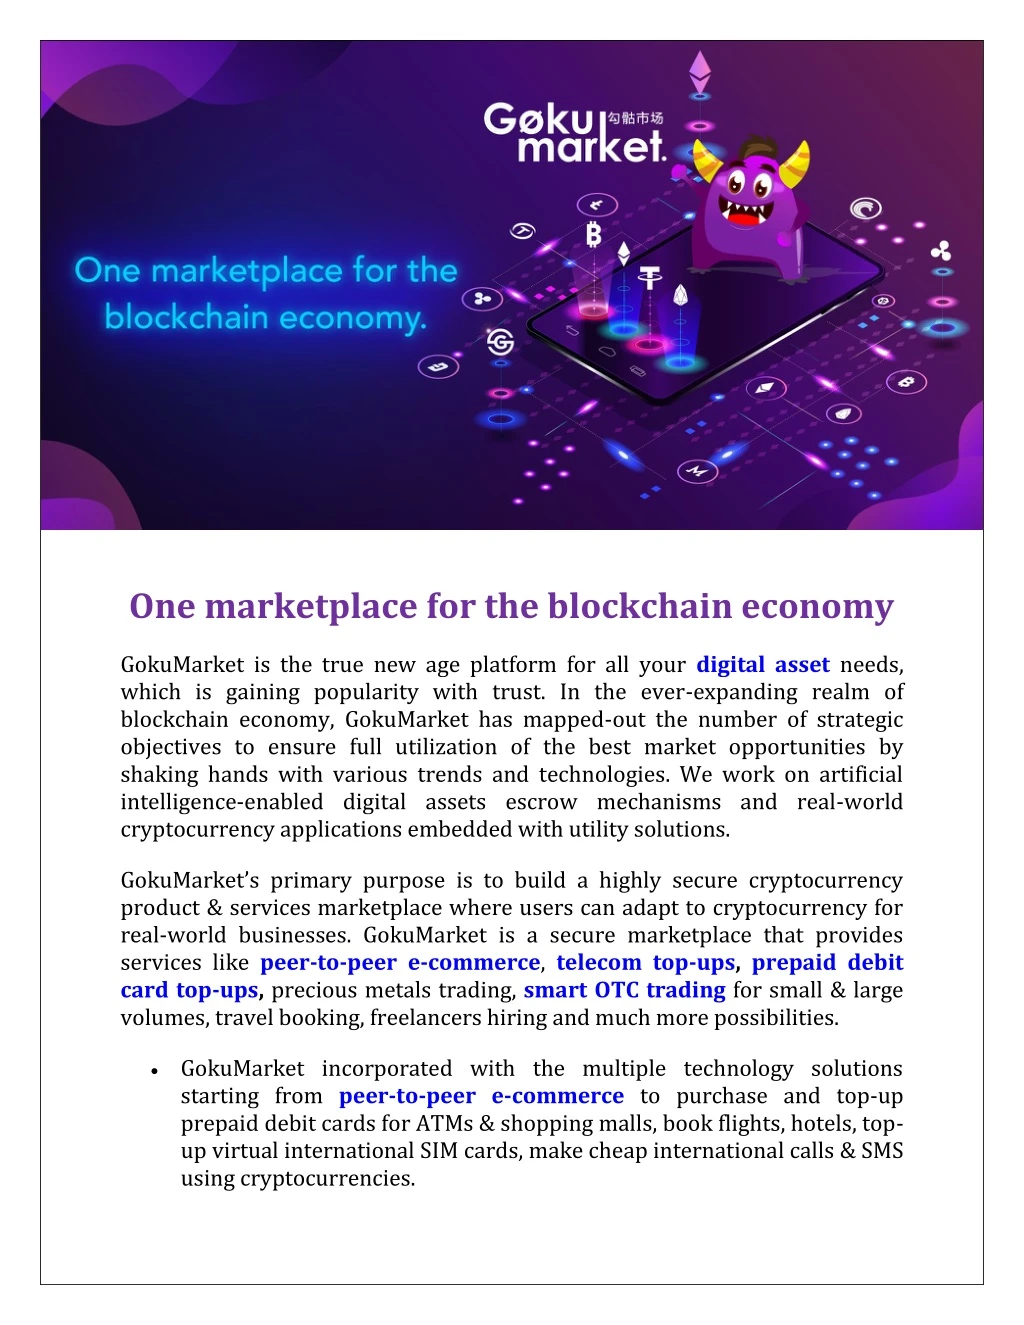 one marketplace for the blockchain economy